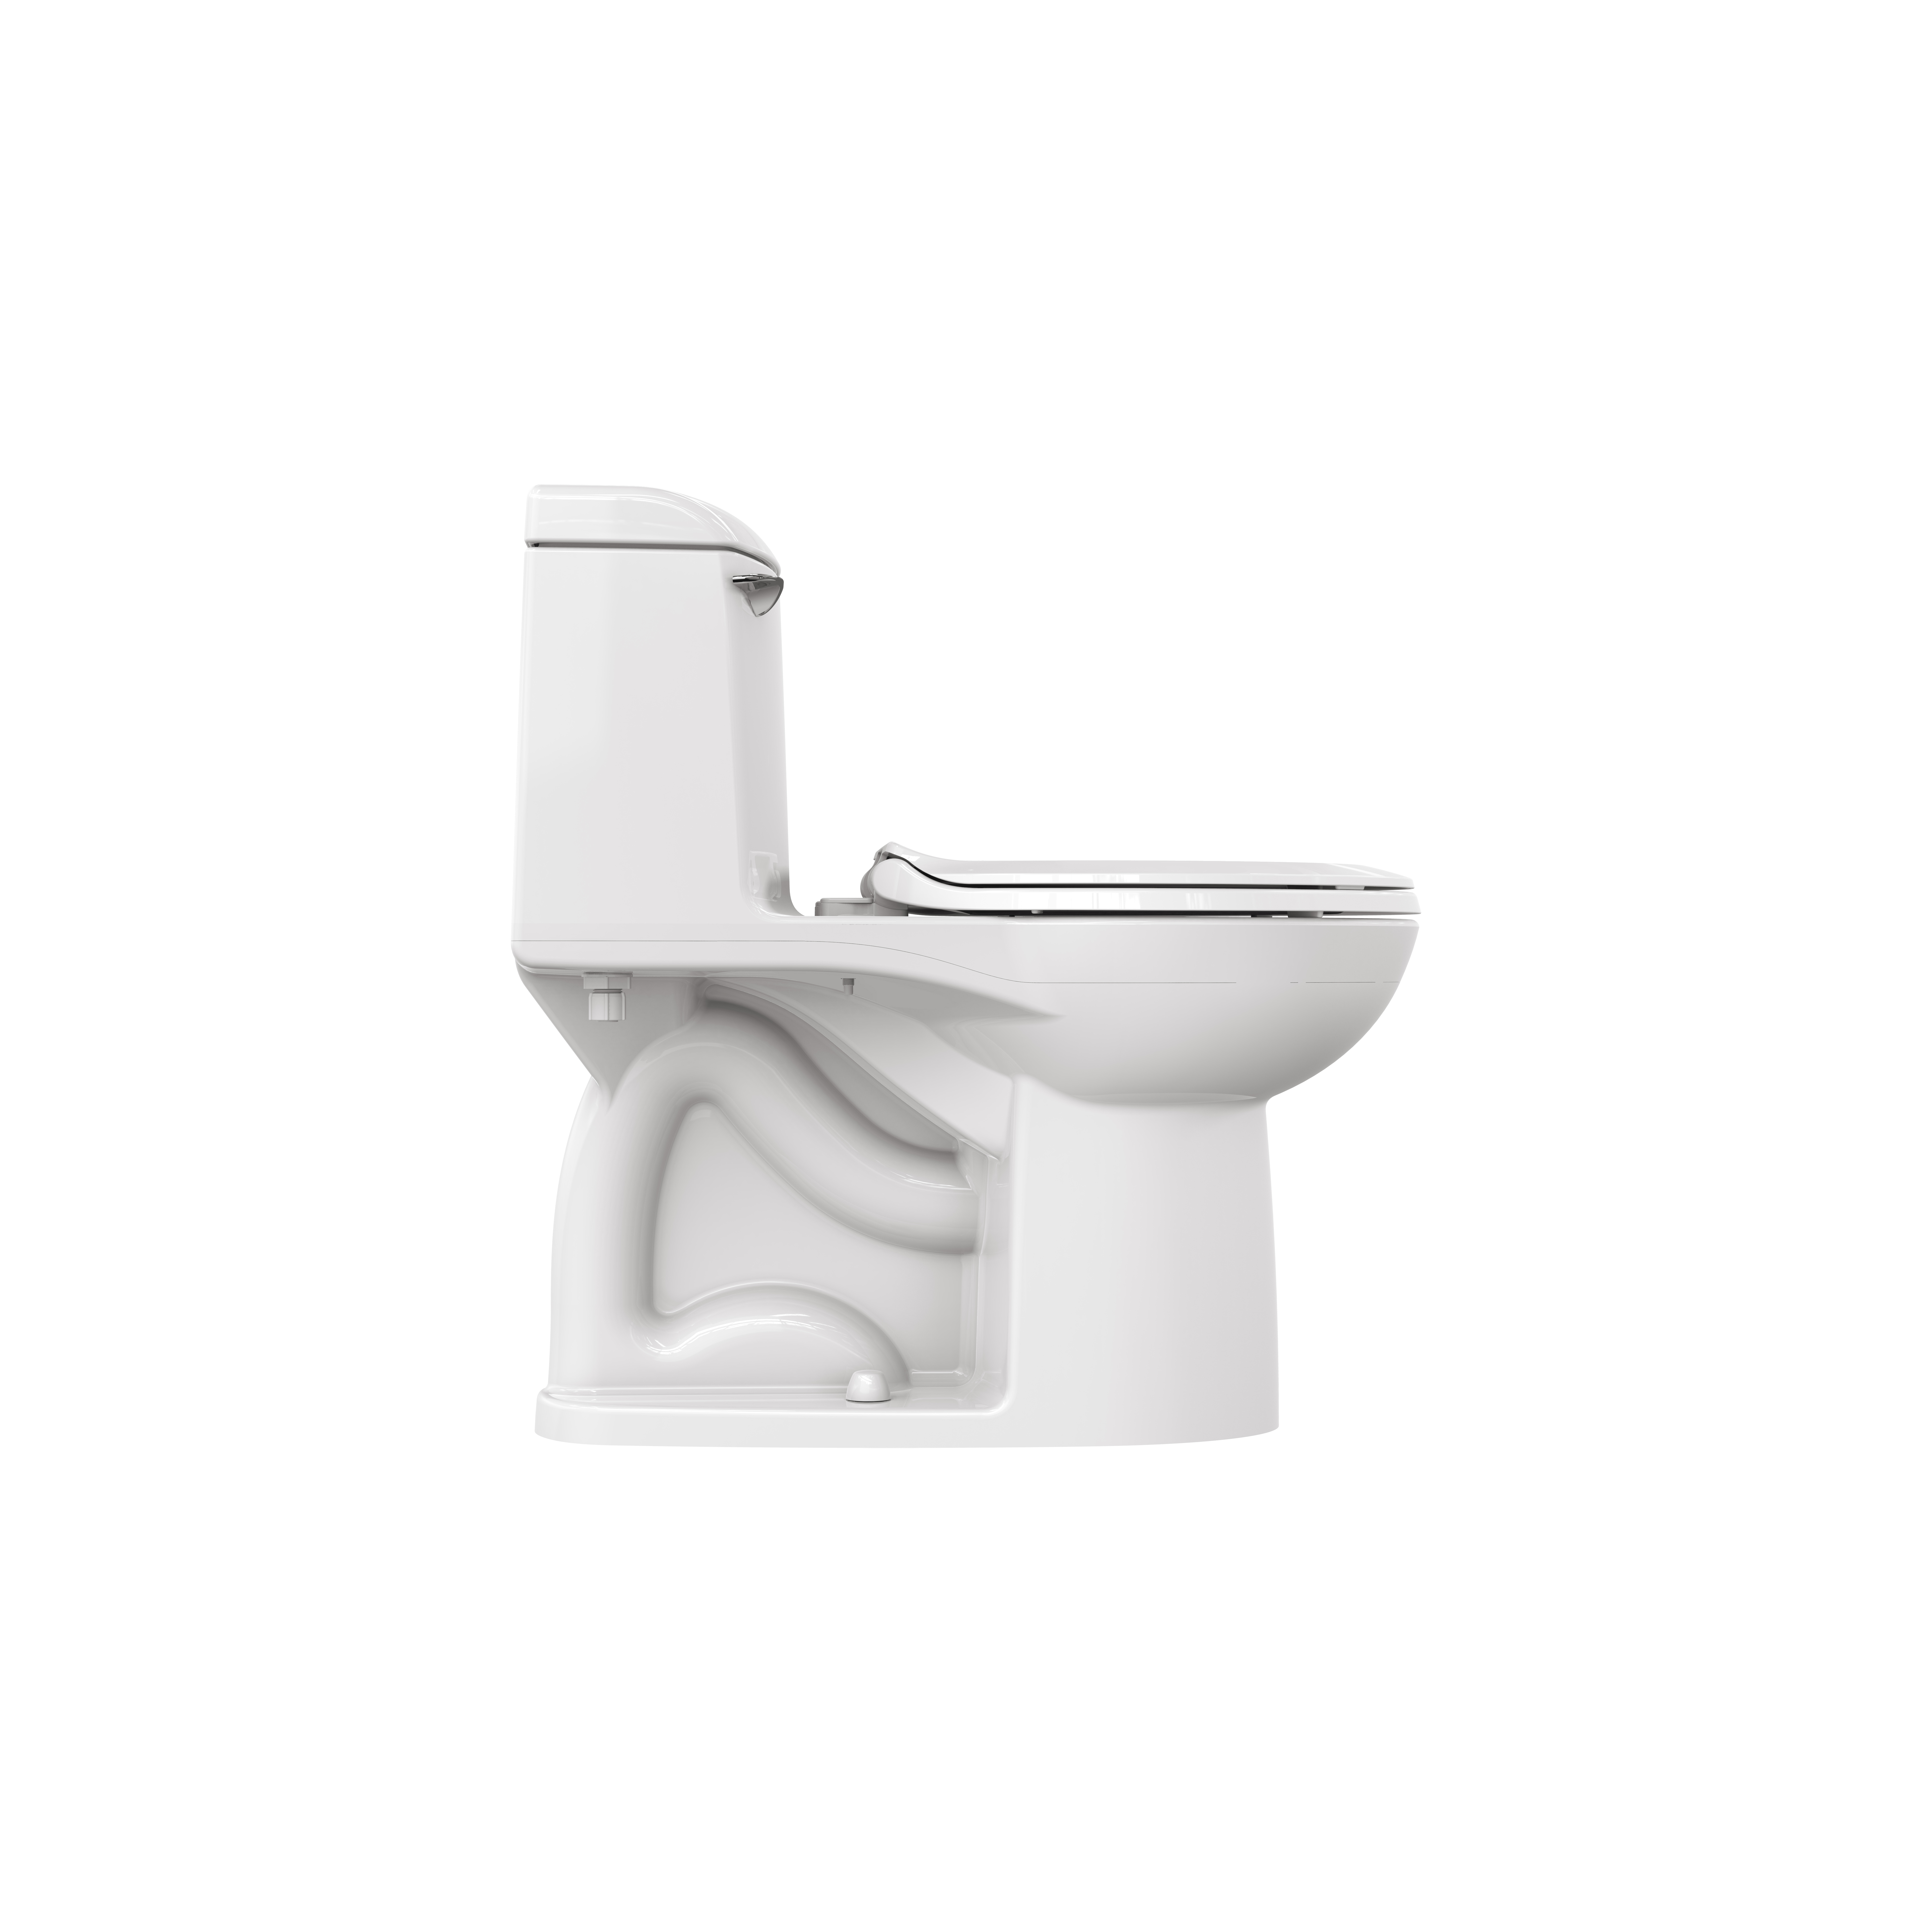 Champion® 4 One-Piece 1.6 gpf/6.0 Lpf Standard Height Elongated Toilet With Seat